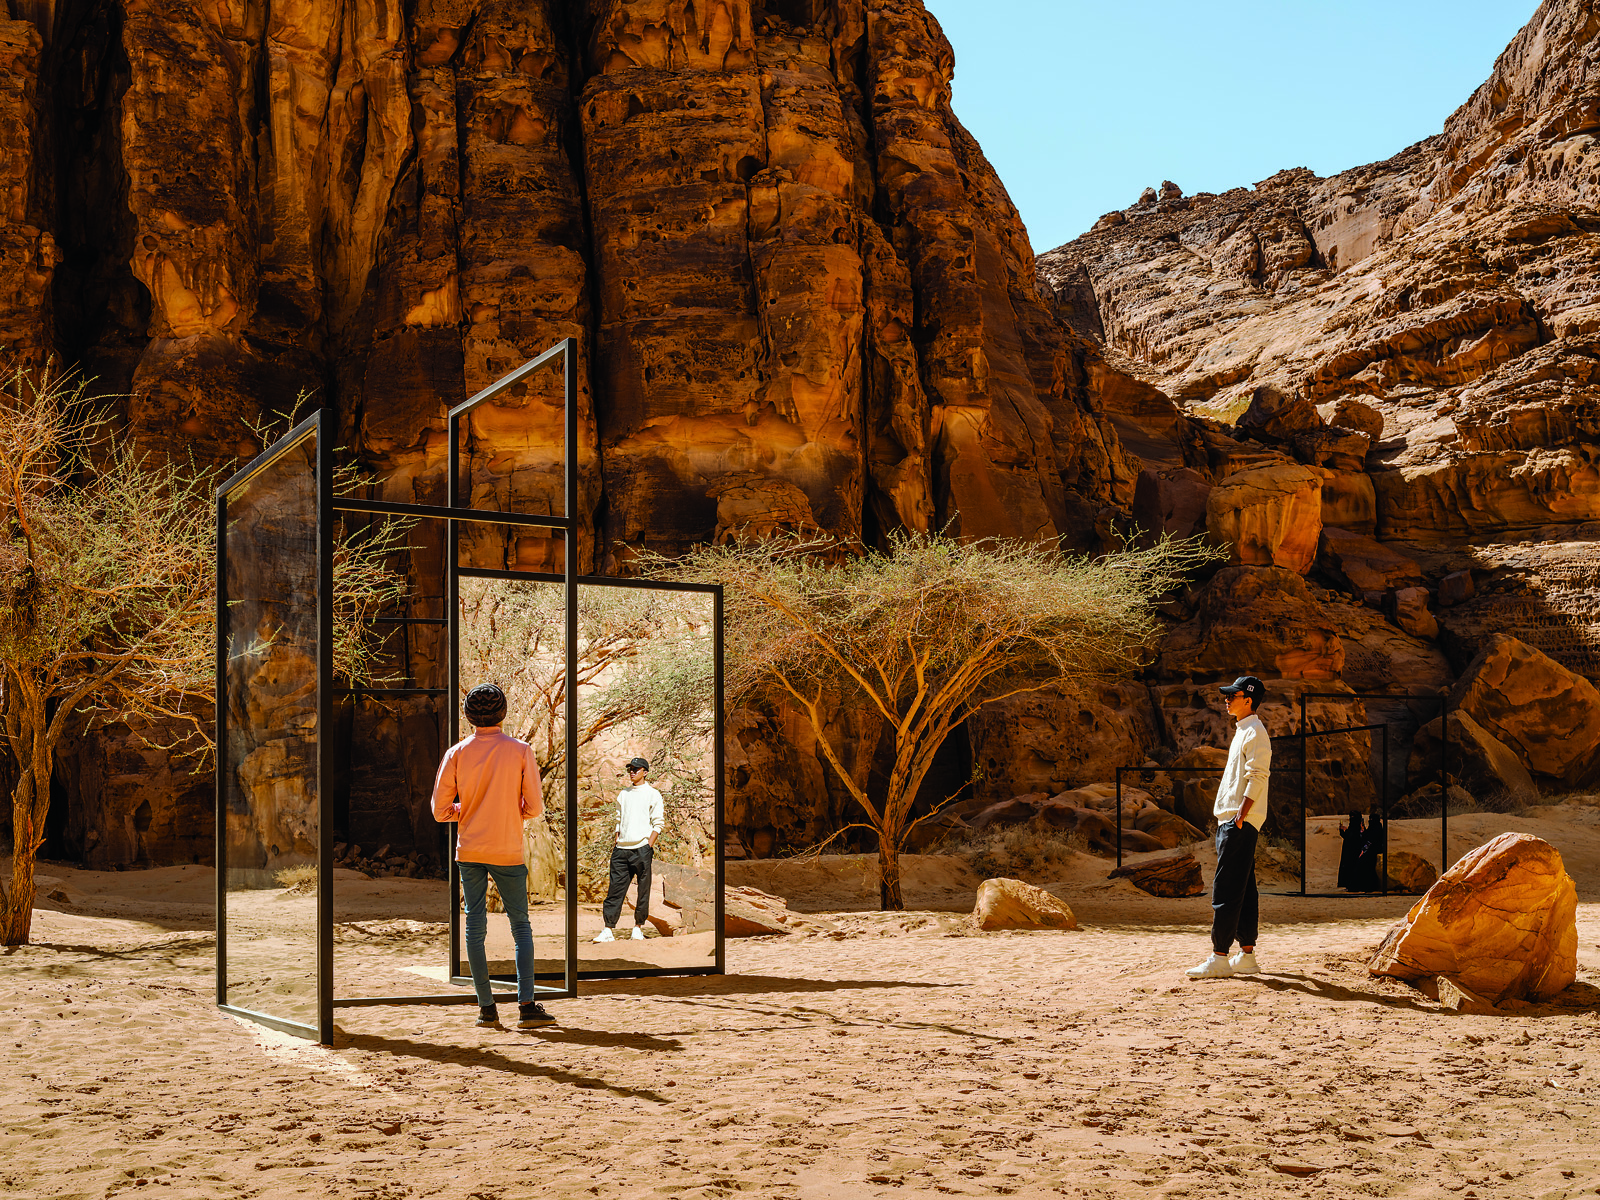 Installed at DesertX AlUla 2022, Berlin-based artist Alicja Kwade's 'In Blur" used steel and mirrors to amplify and complicate the sandy expanse under sandstone cliffs.